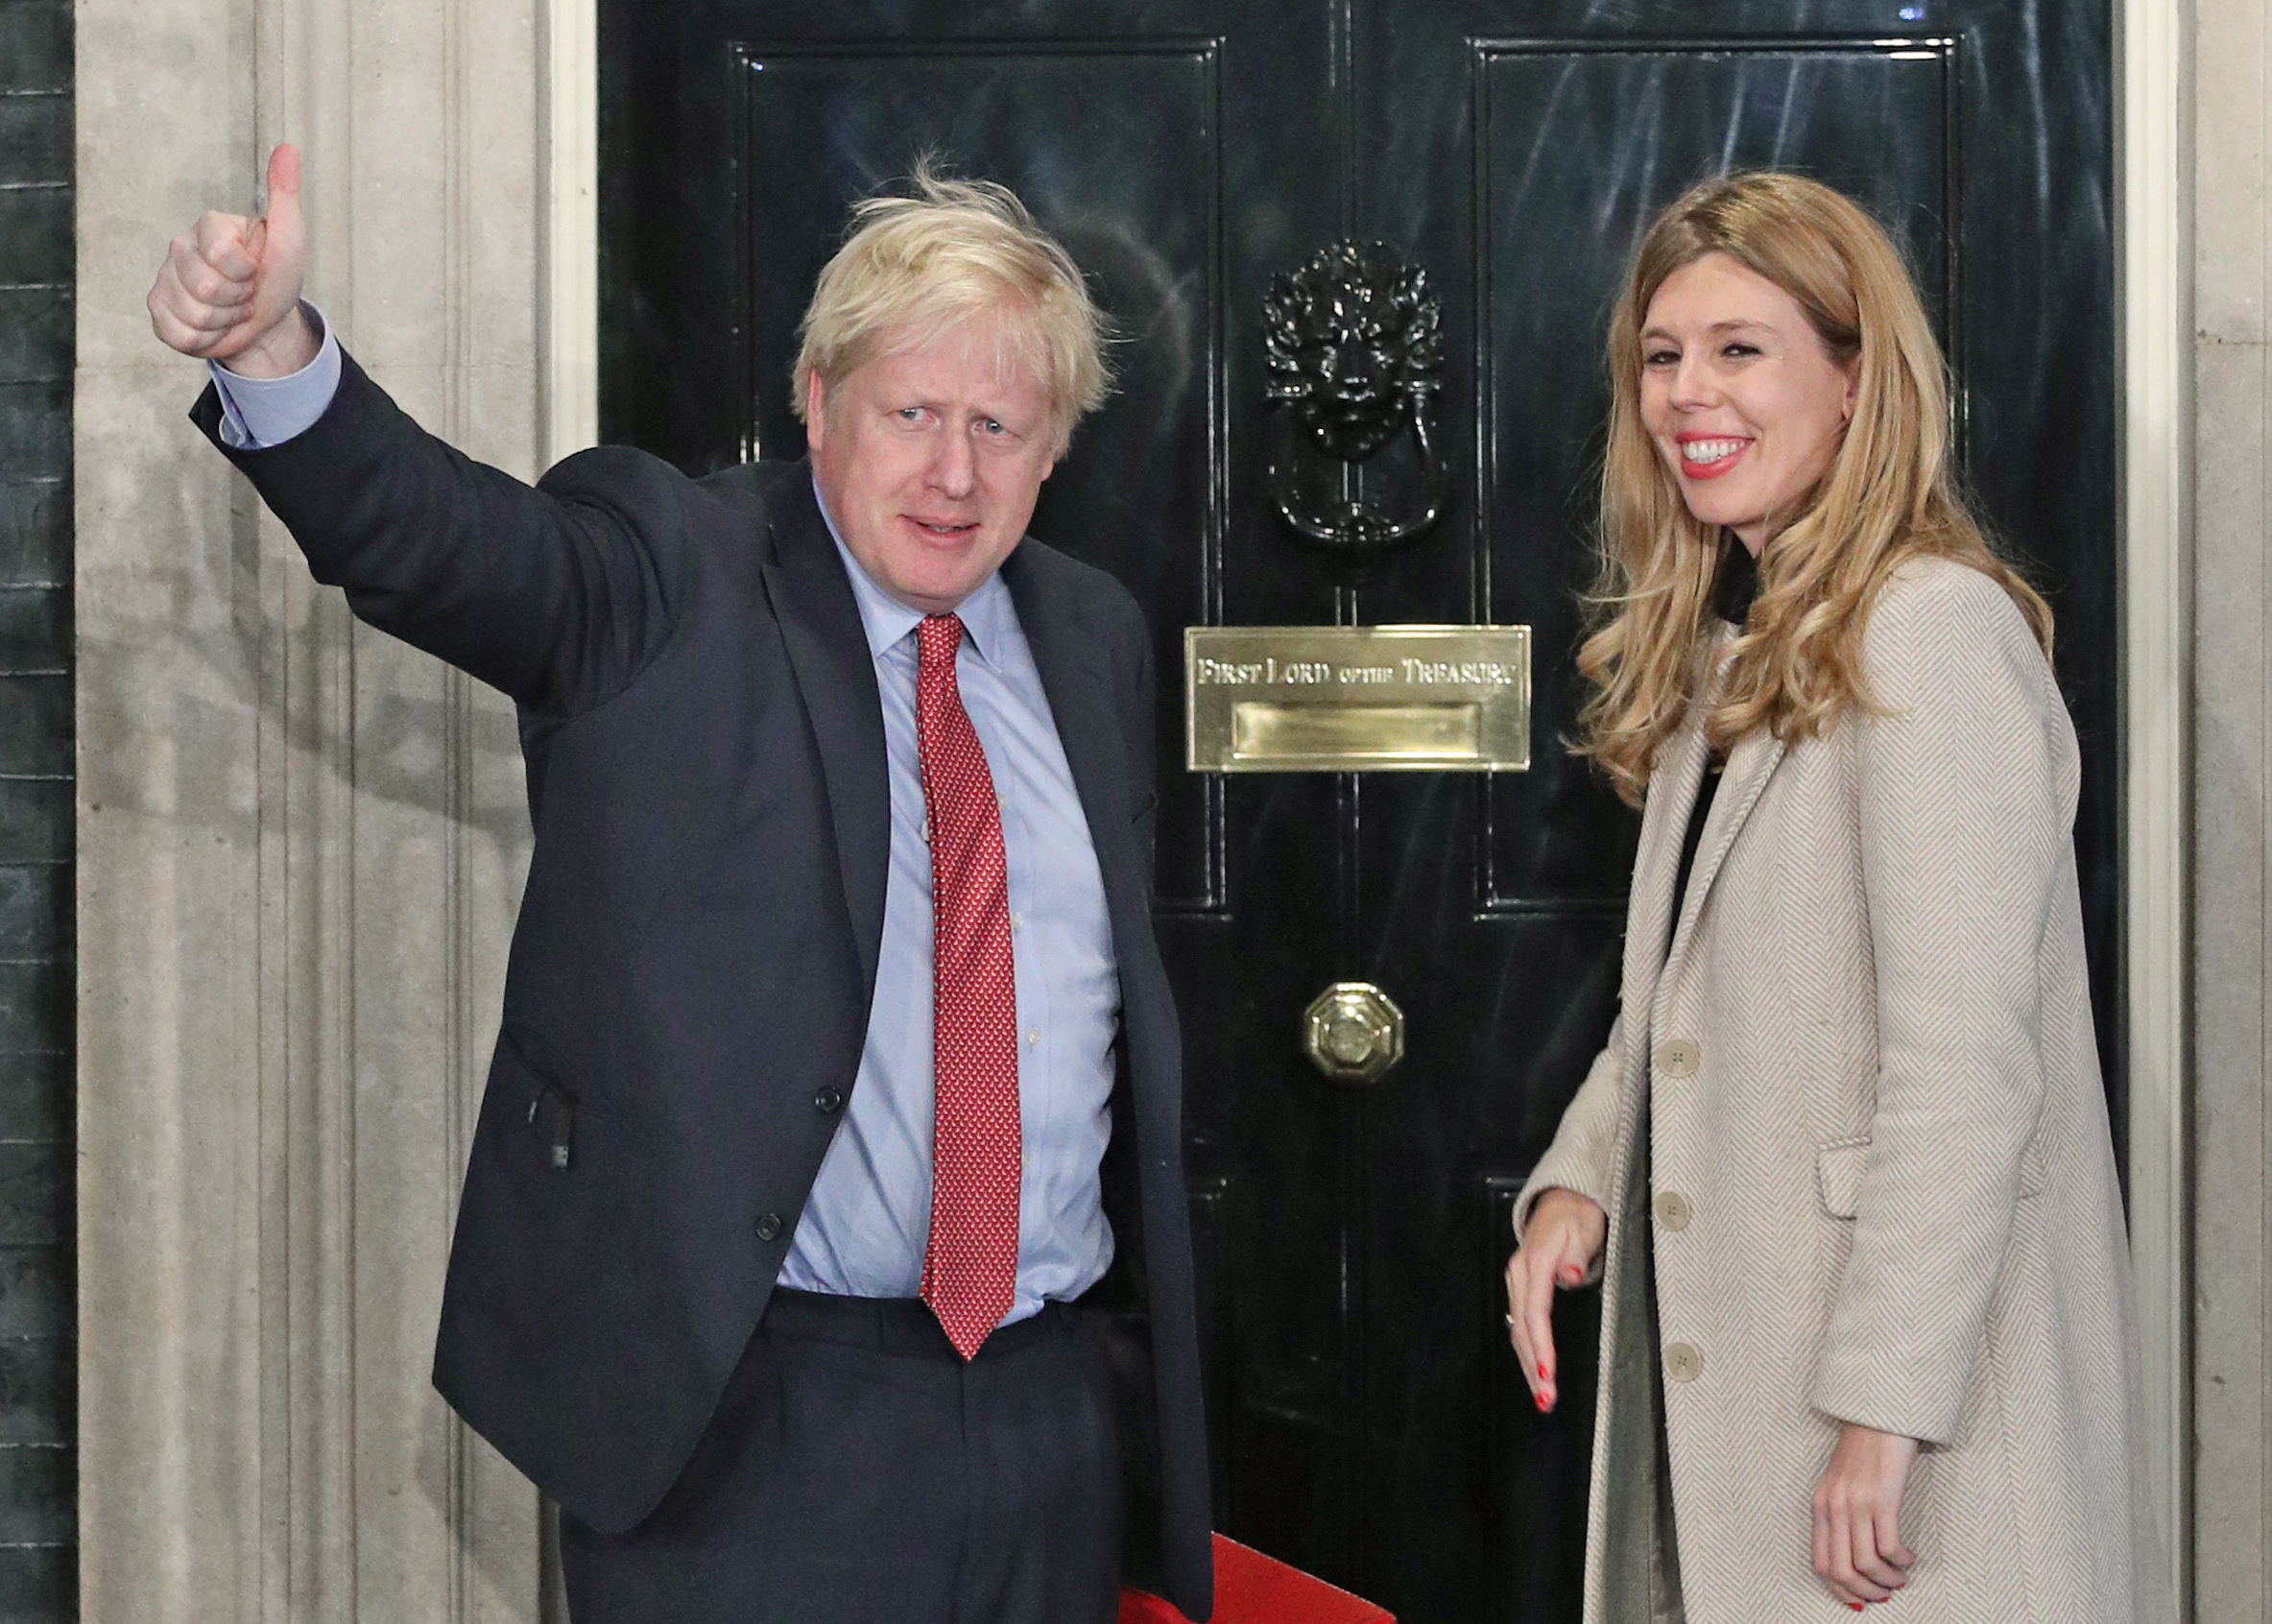 Prime Minister Boris Johnson and his girlfriend Carrie Symonds arrive in Downing Street after the Conservative Party was returned to power in the General Election with an increased majority.